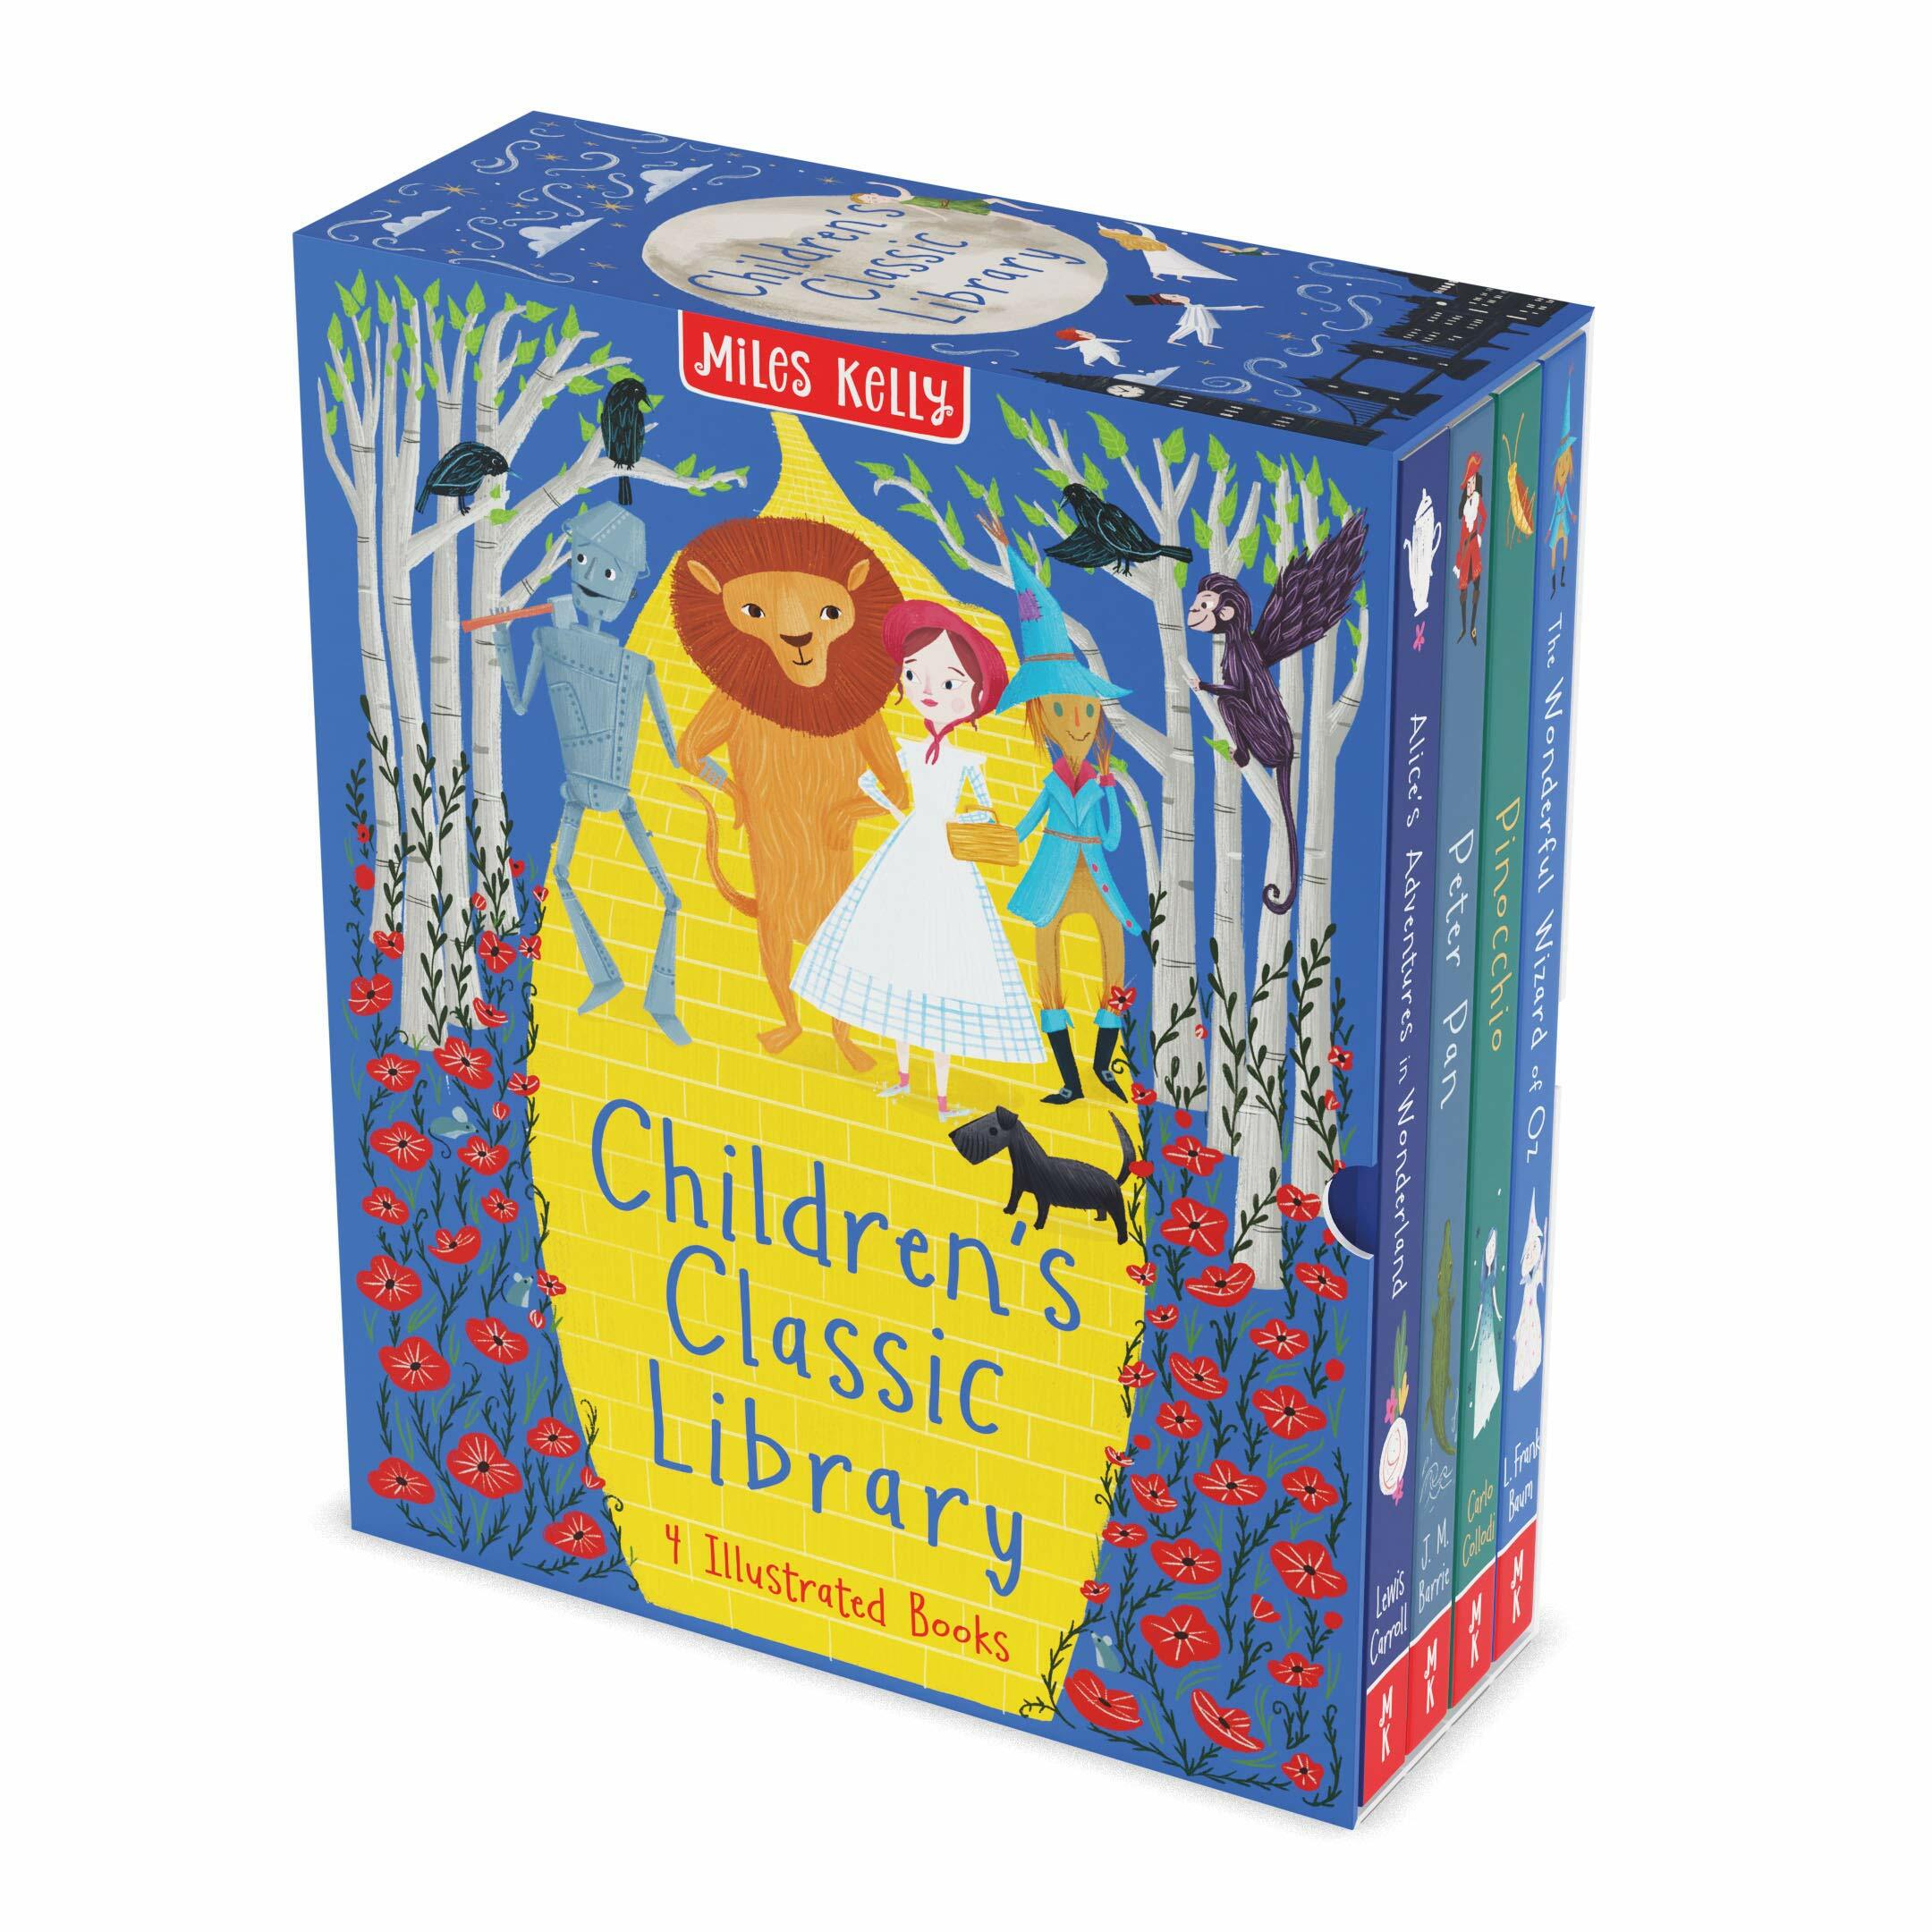 Childrens Classic Library Slipcase (Hardcover 4권)